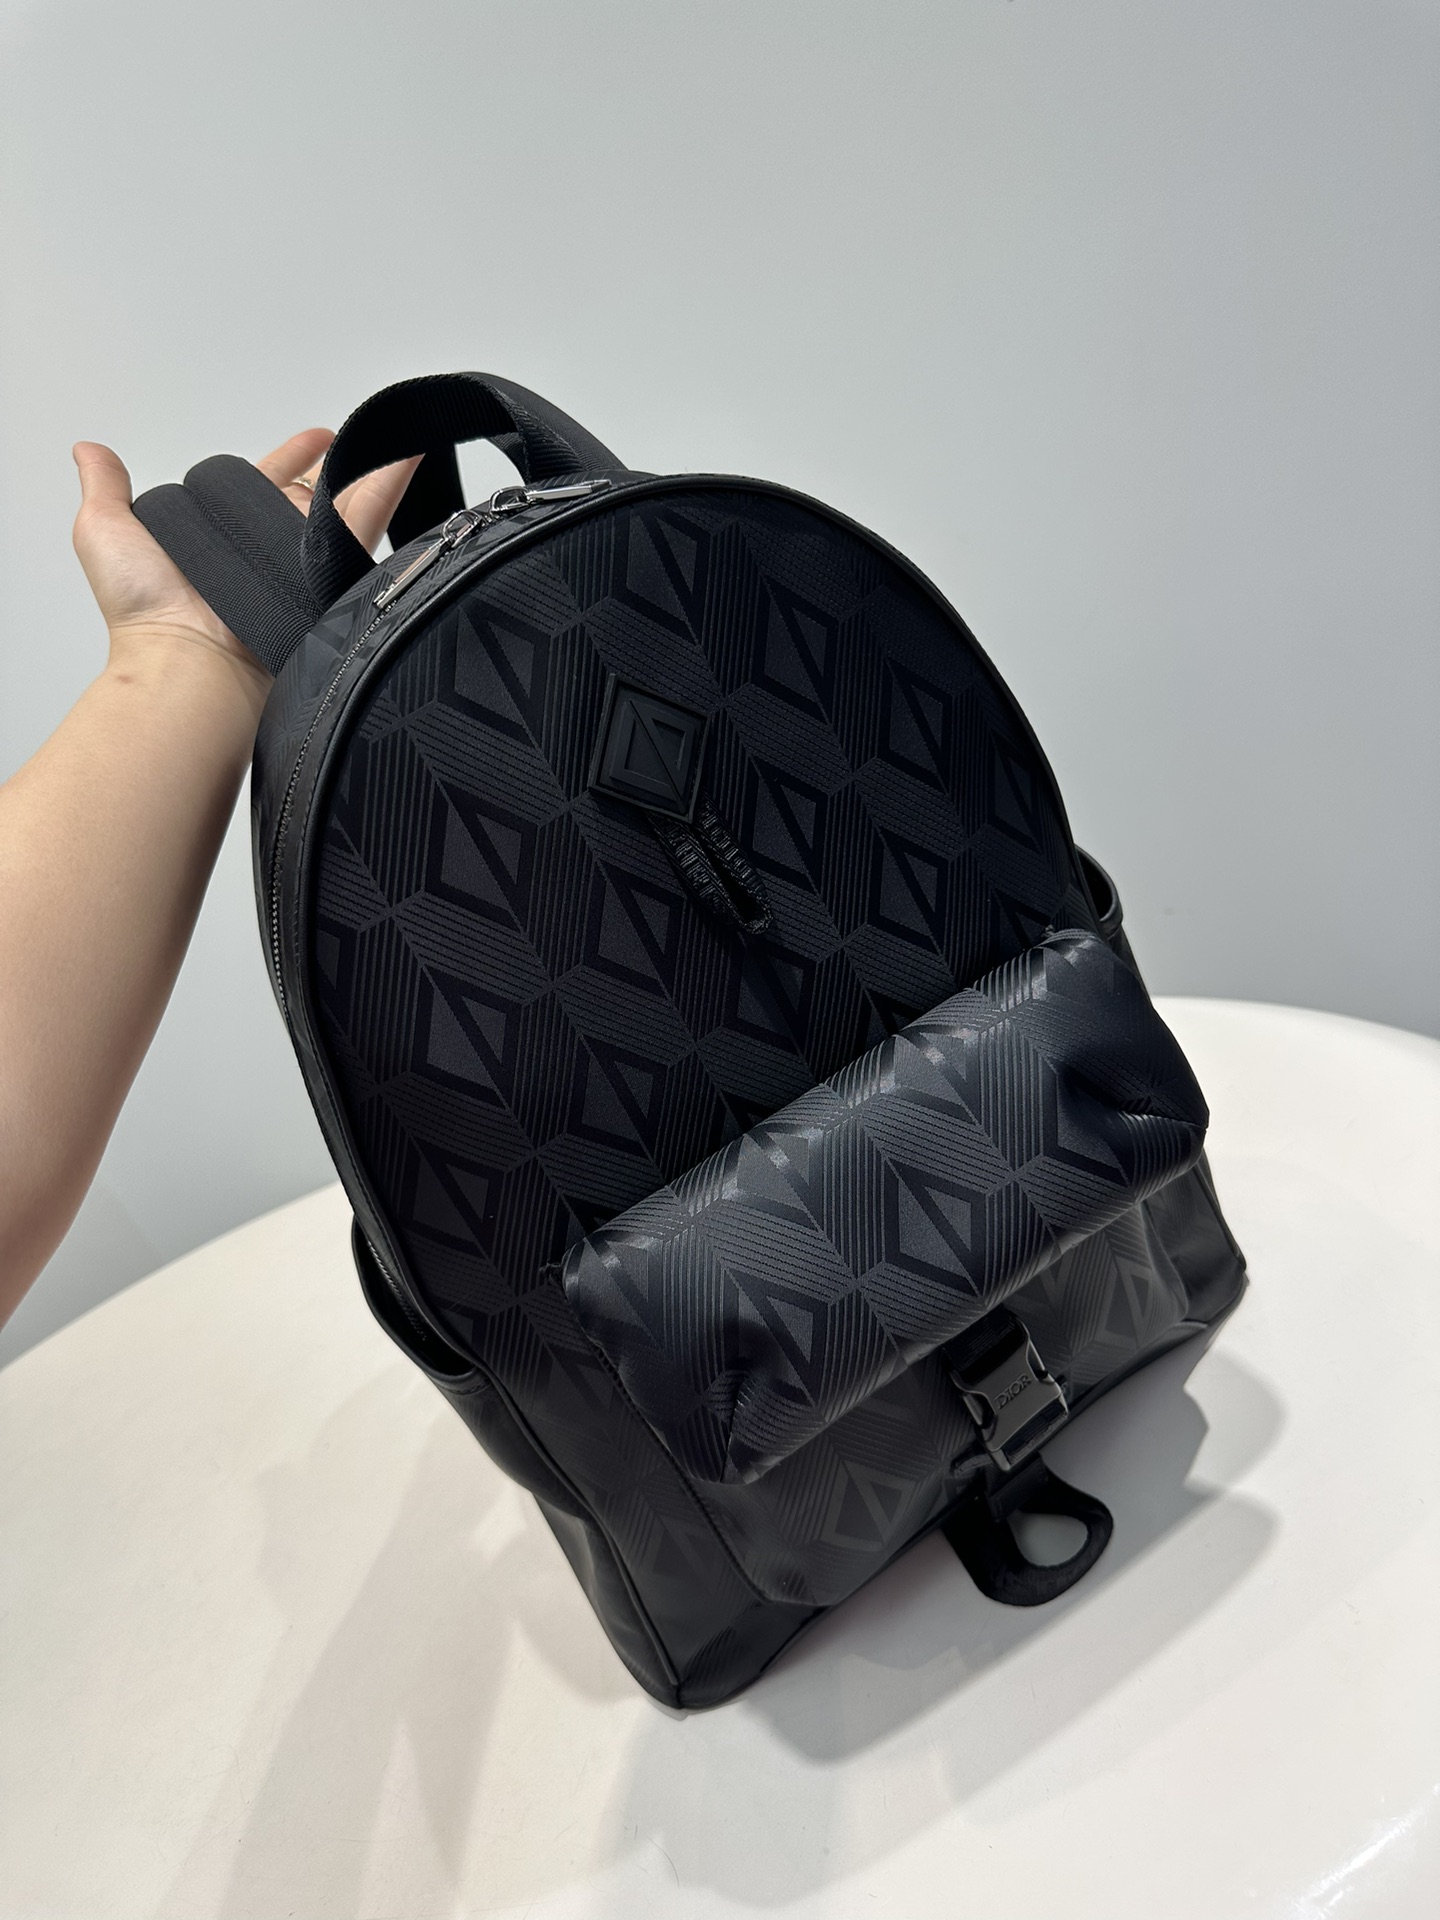 Dior Bags Backpack Black Bronzing Unisex Men Fabric Nylon Rubber Fall/Winter Collection Diamond Casual